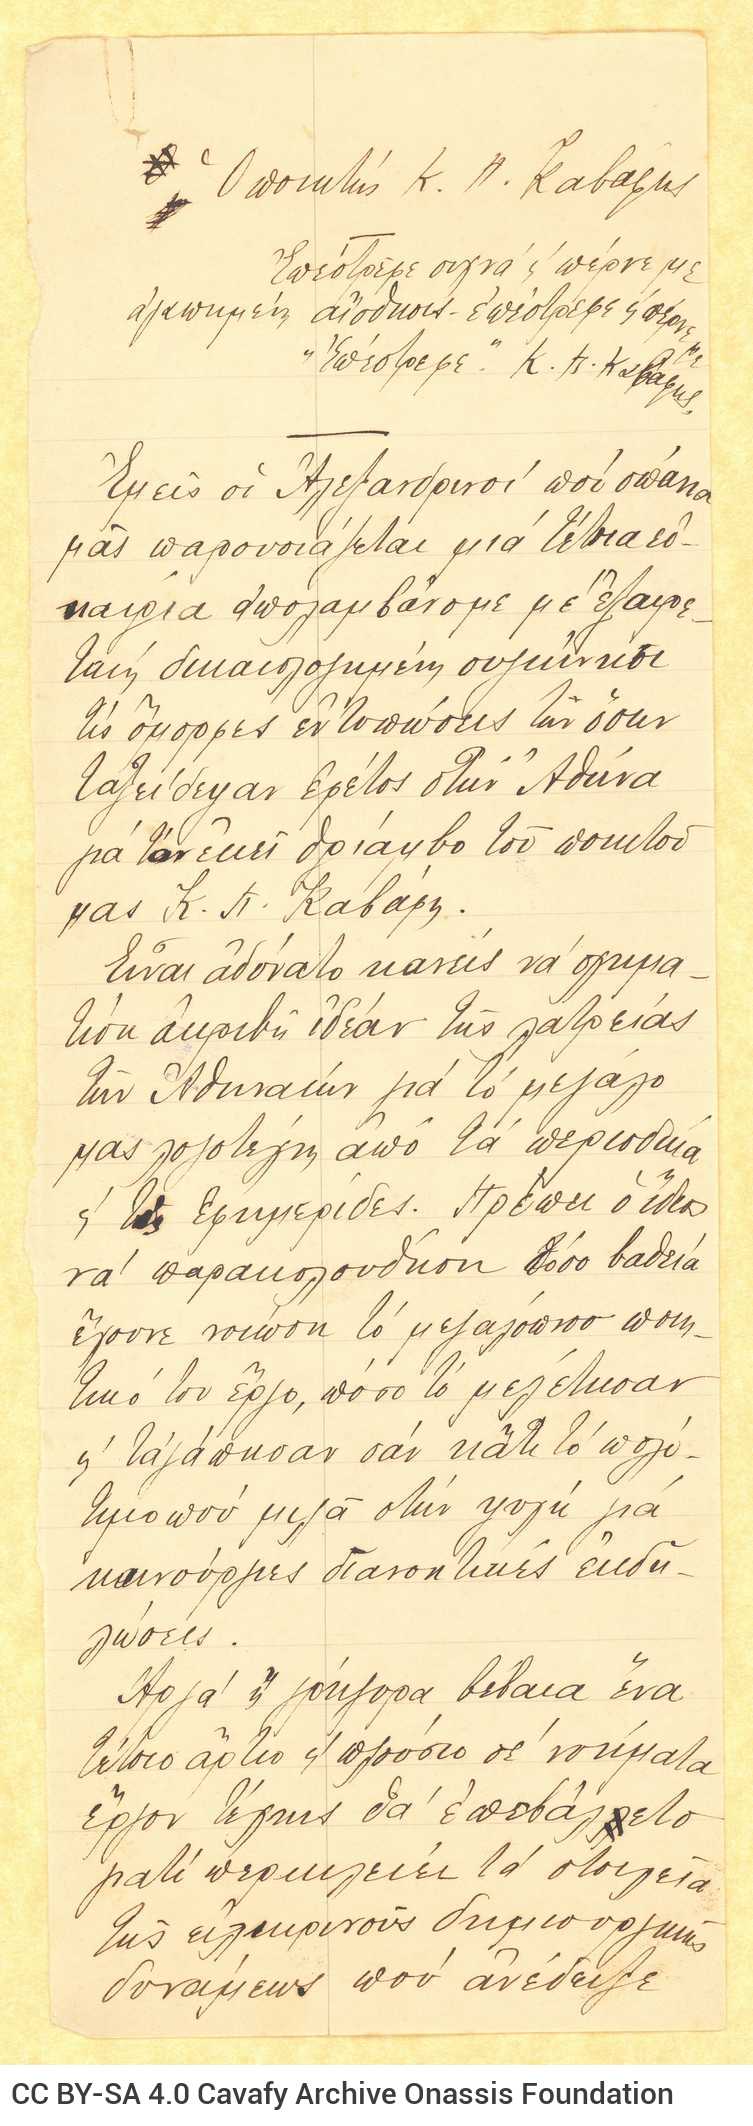 Handwritten prose text by Rica Singopoulo in two sheets cut lengthwise and in a bifolio, also cut in half along the length of